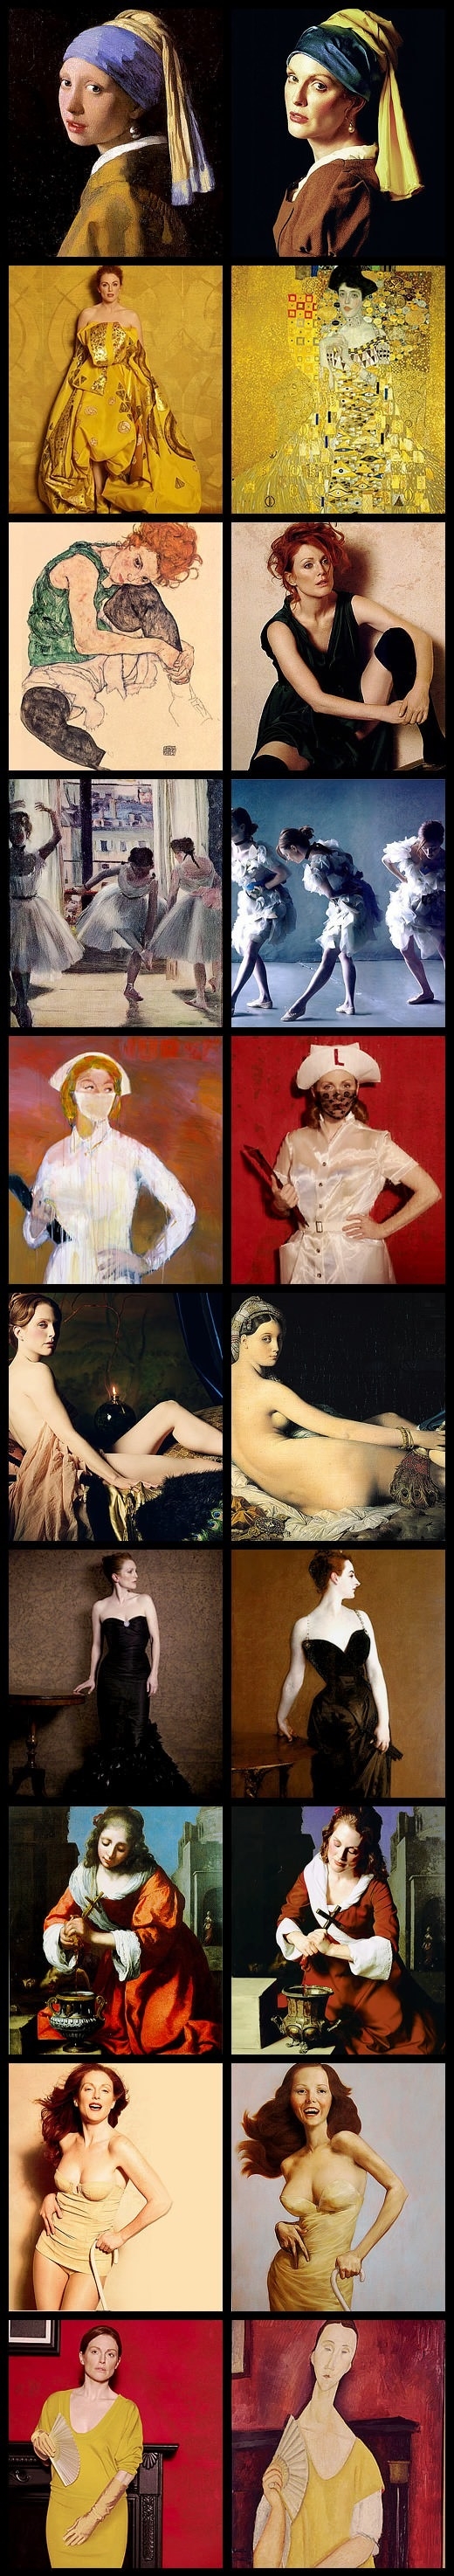 Famous art works recreated